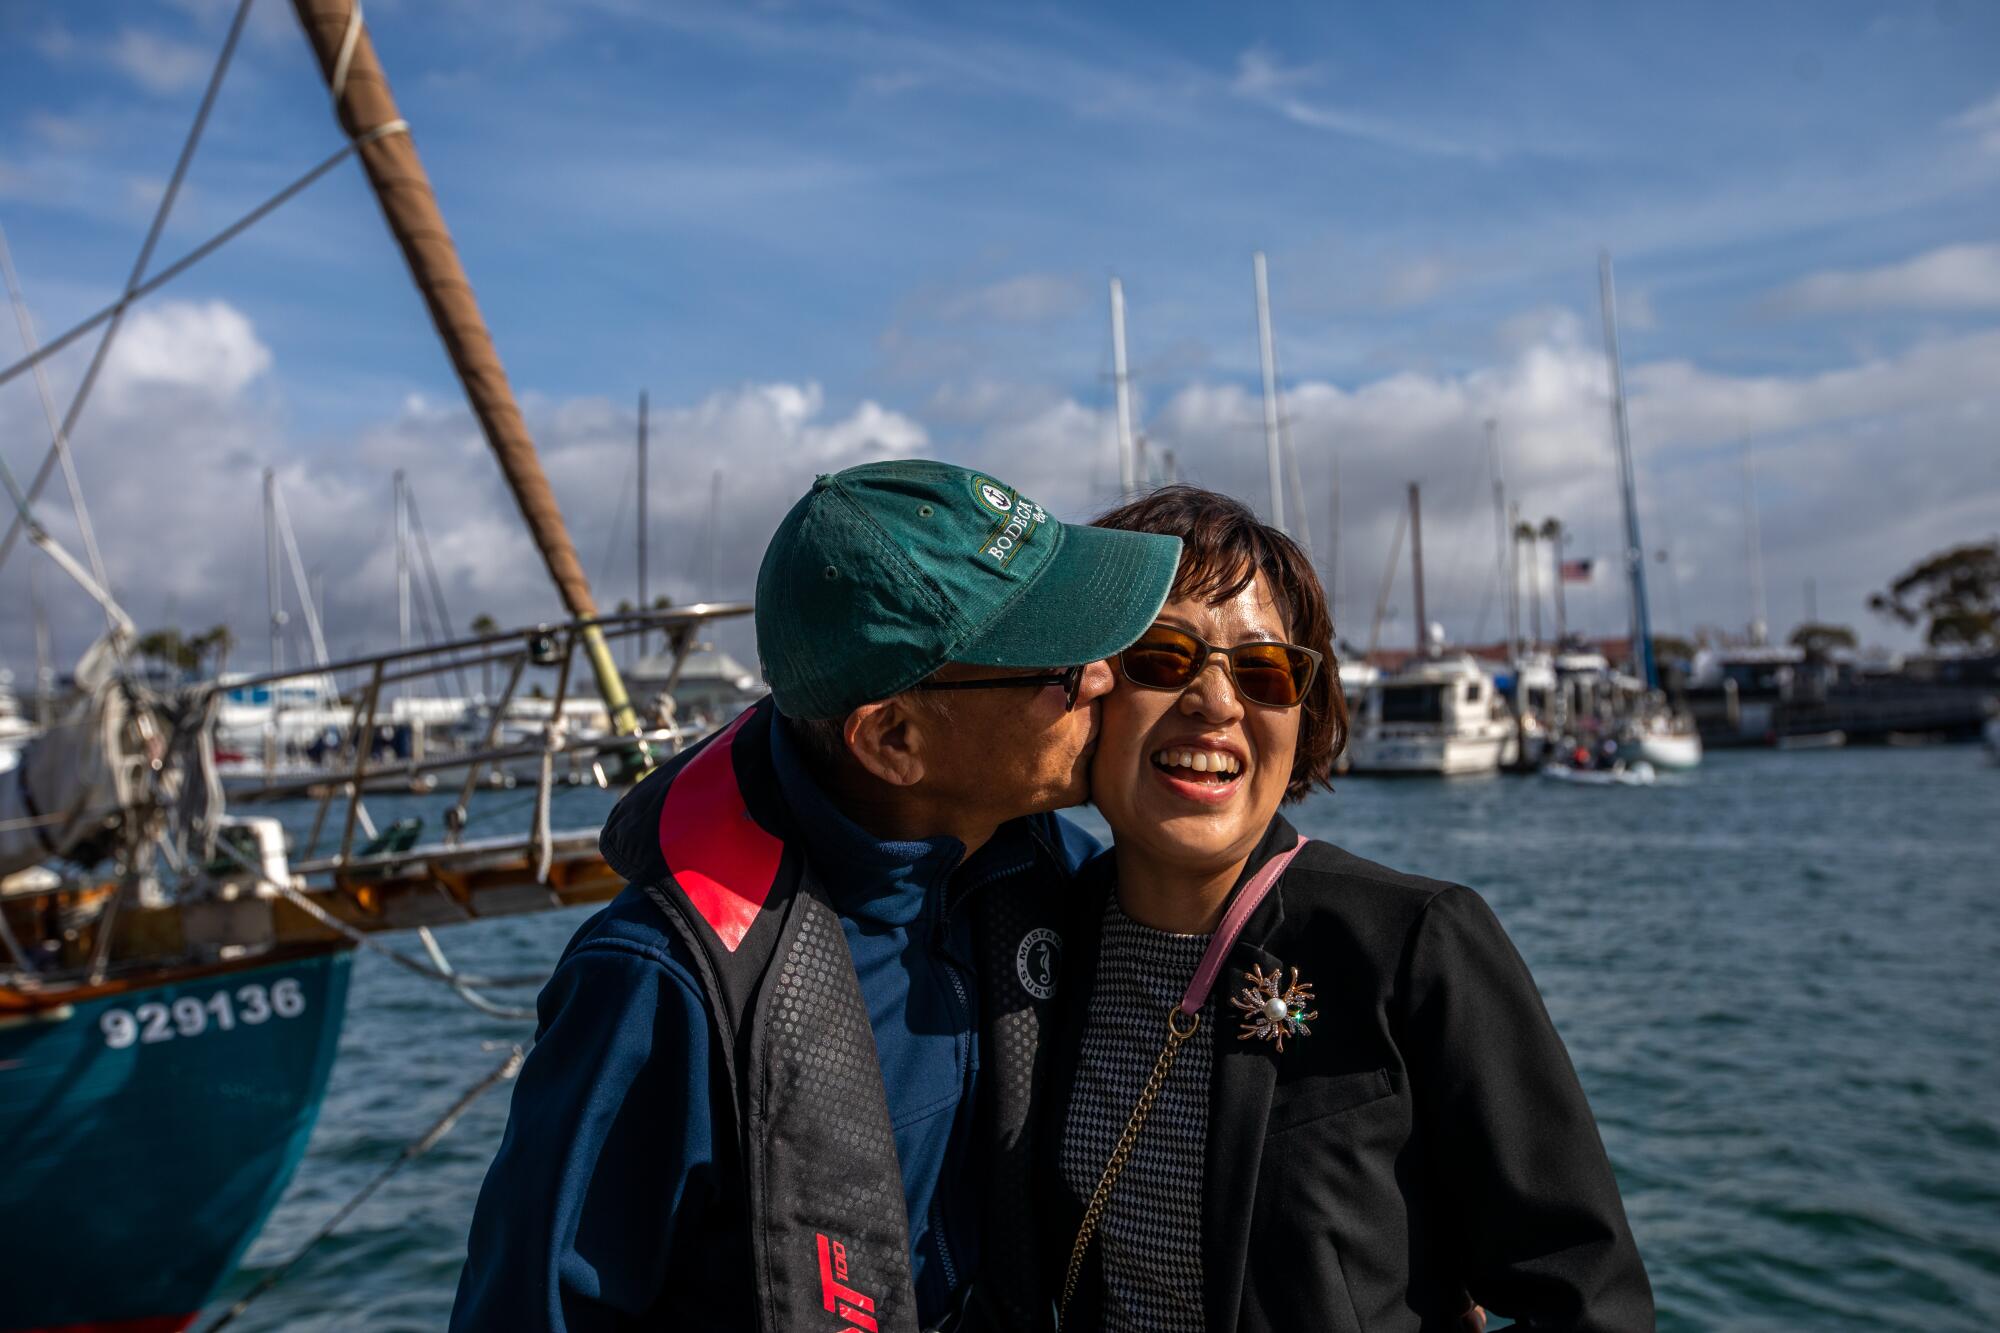 Standing in a sailboat harbor, a man at left kisses a woman who reacts smiling and closing her eyes.